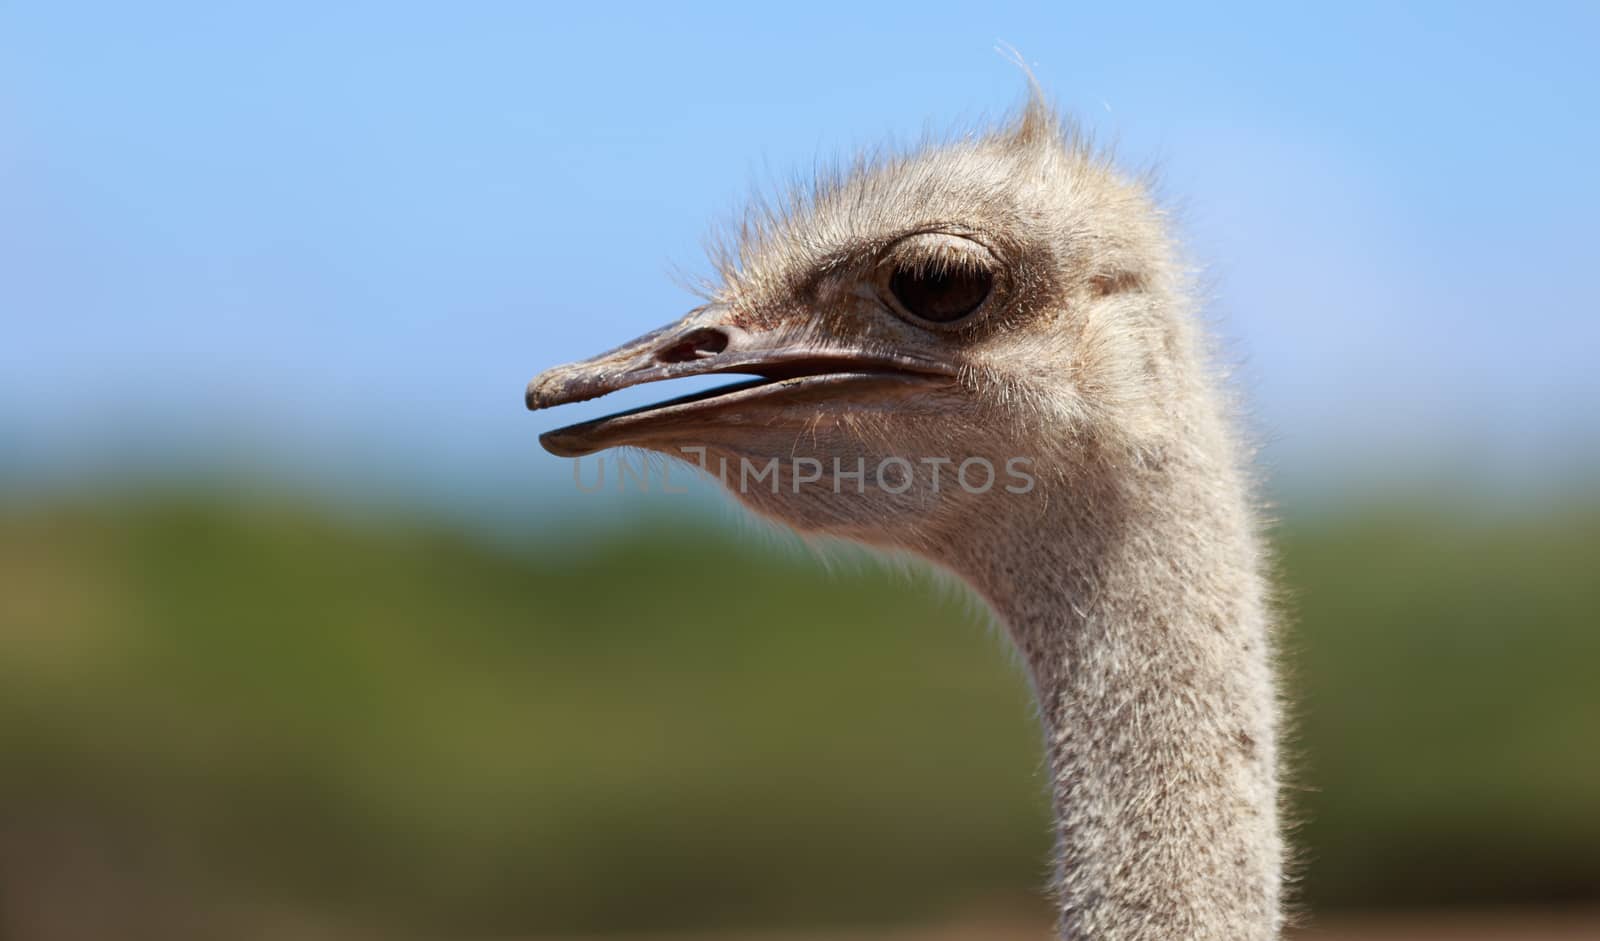 Side close-up shot of an ostrich head. Blurred background.